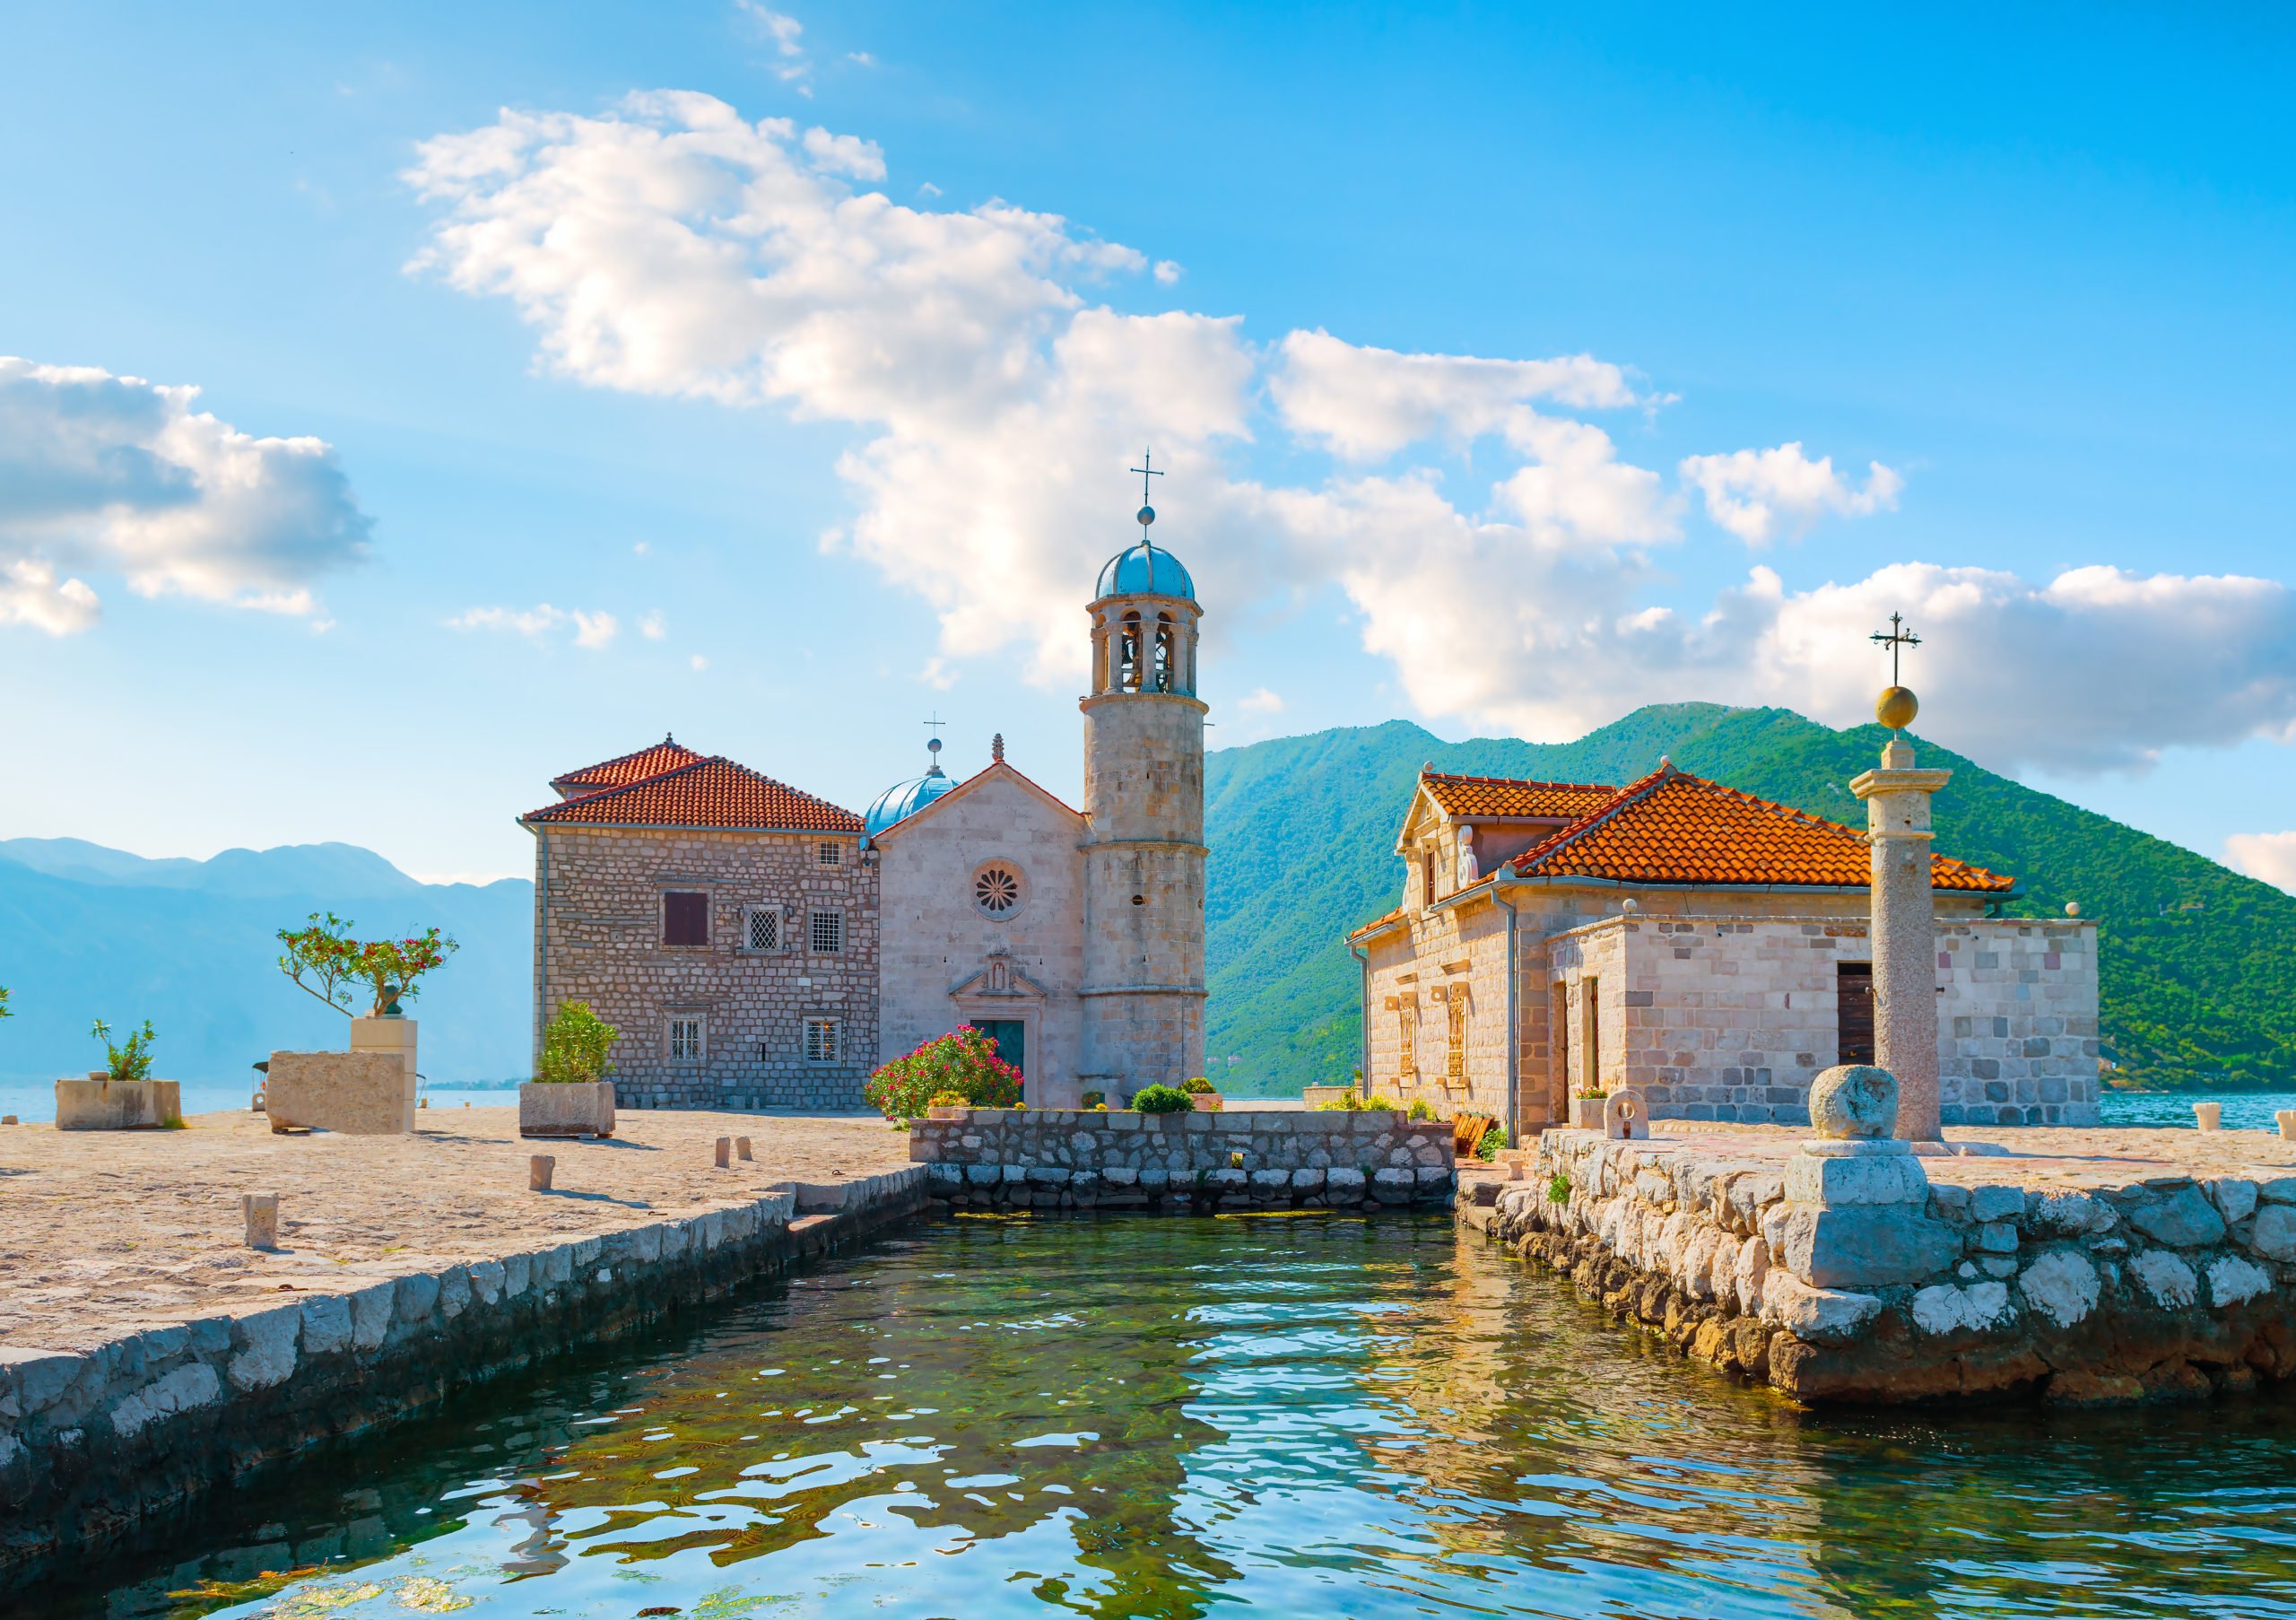 Visit The Church Of Our Lady Of The Rocks On The Montenegro Day Tour From Dubrovnik